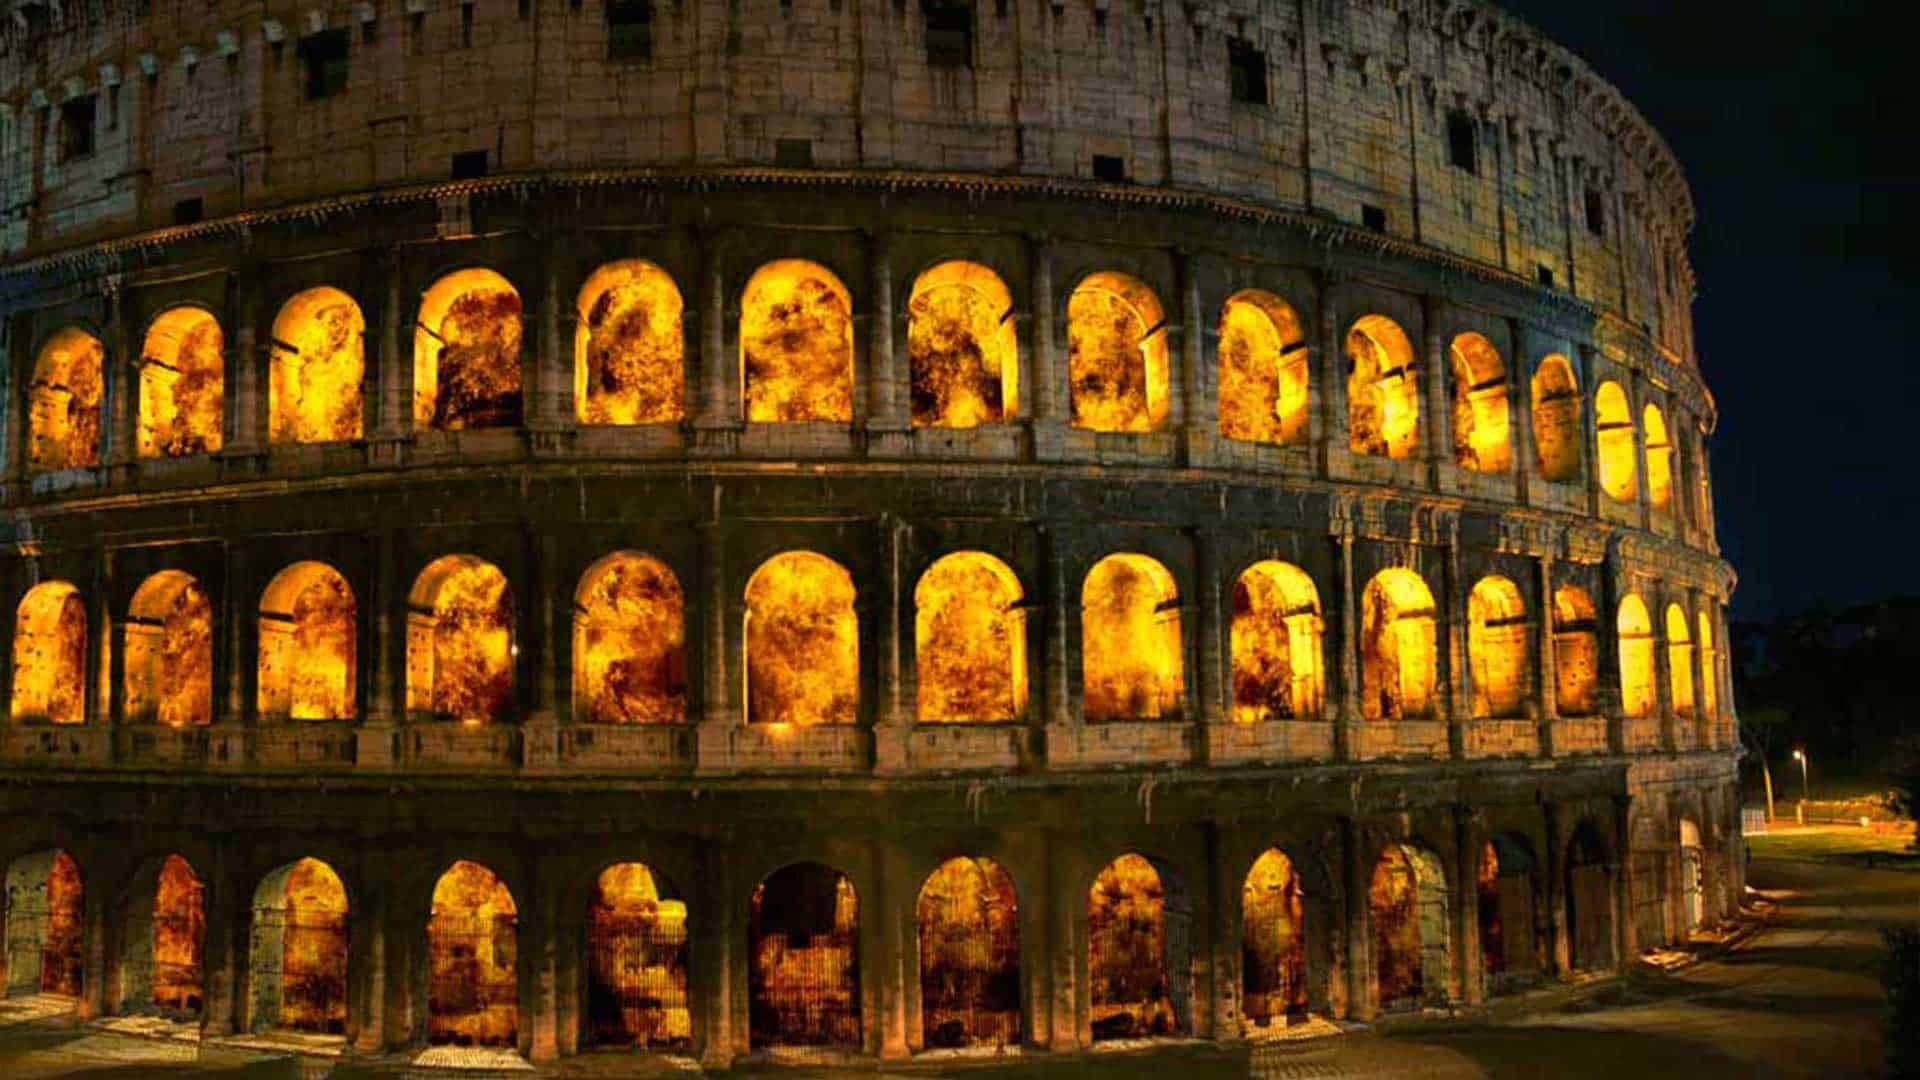 COLOSSEUM ON FIRE